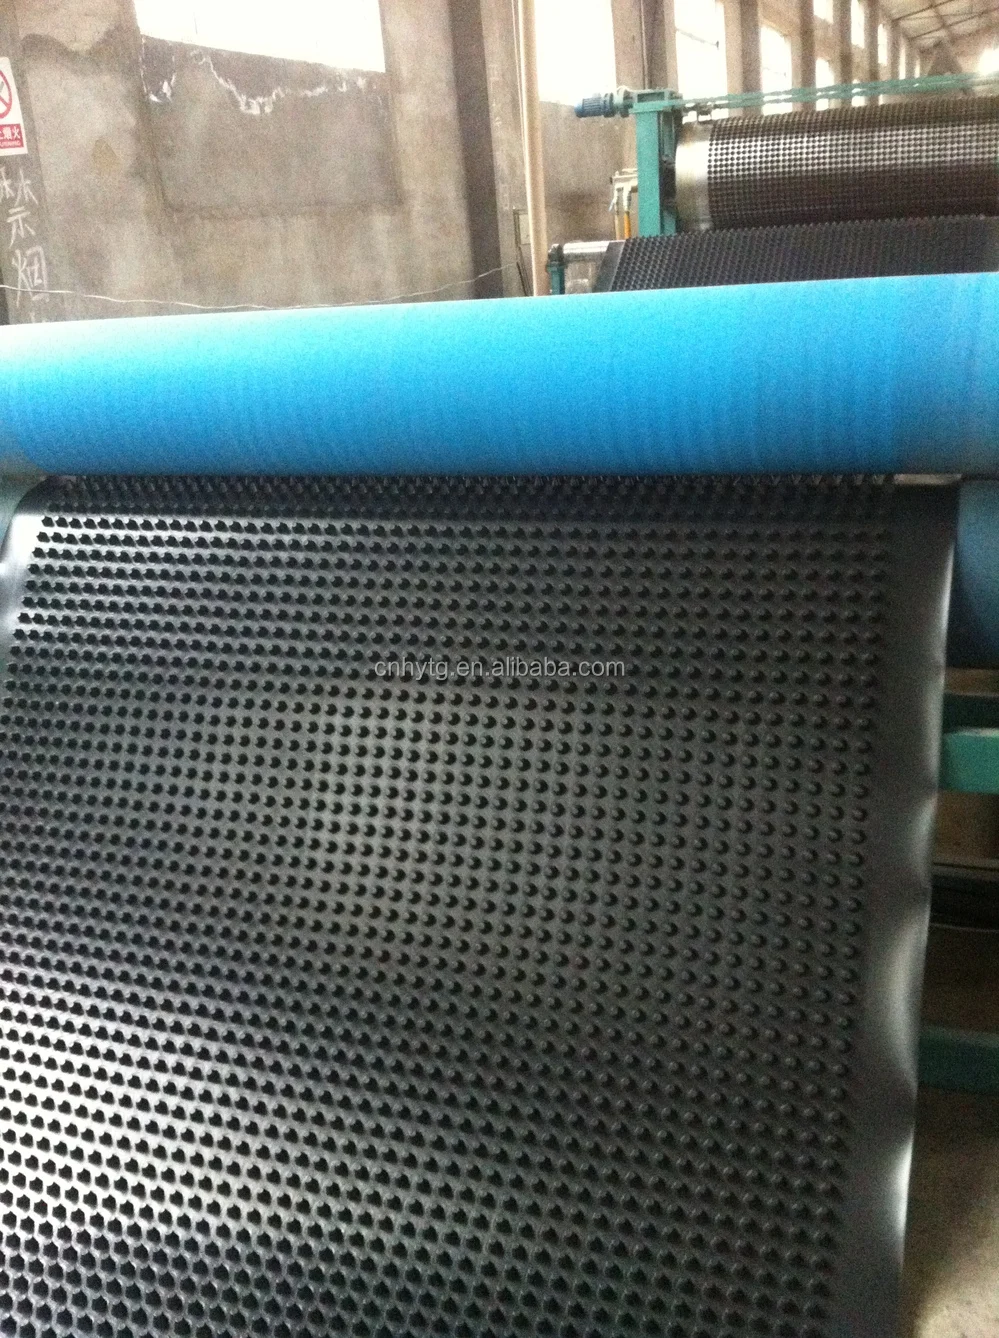 Dimple Mat Drainage Board 8mm Thickness Drainage Roof Felt Buy Plastic Drainage Board Composite Drainage Board Waterproofing Drainage Board Product On Alibaba Com